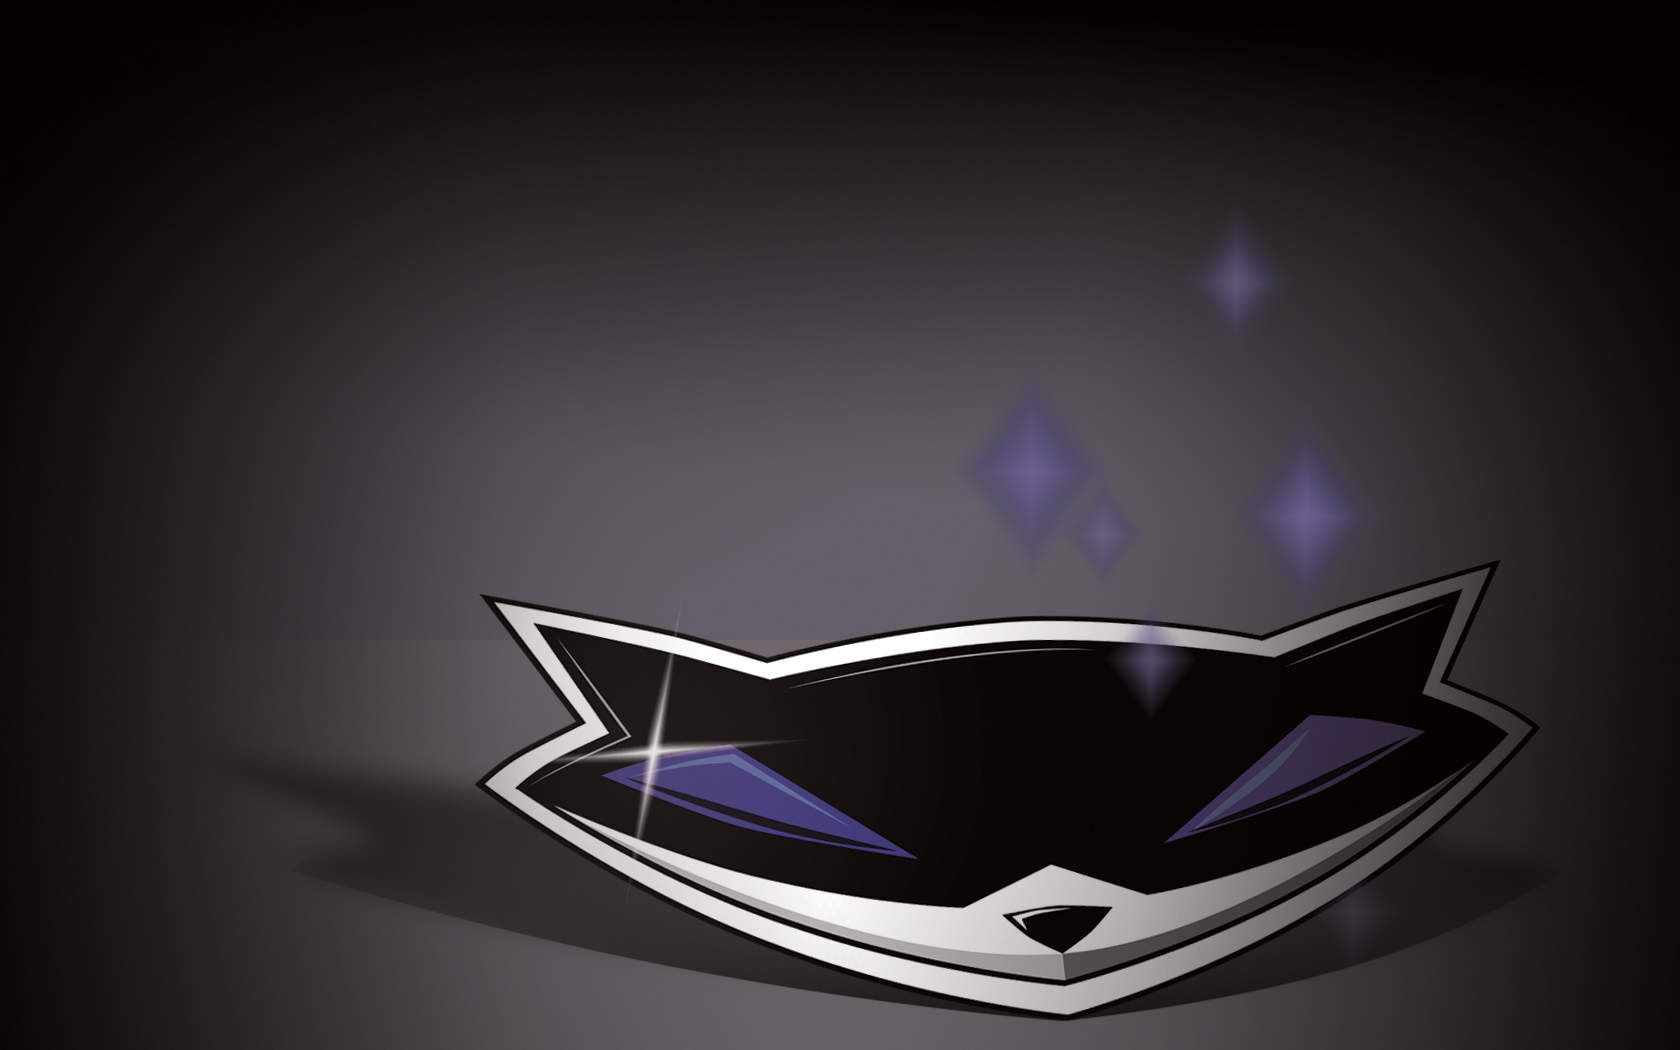 Sly Cooper logo background by MorganJNail 1680x1050